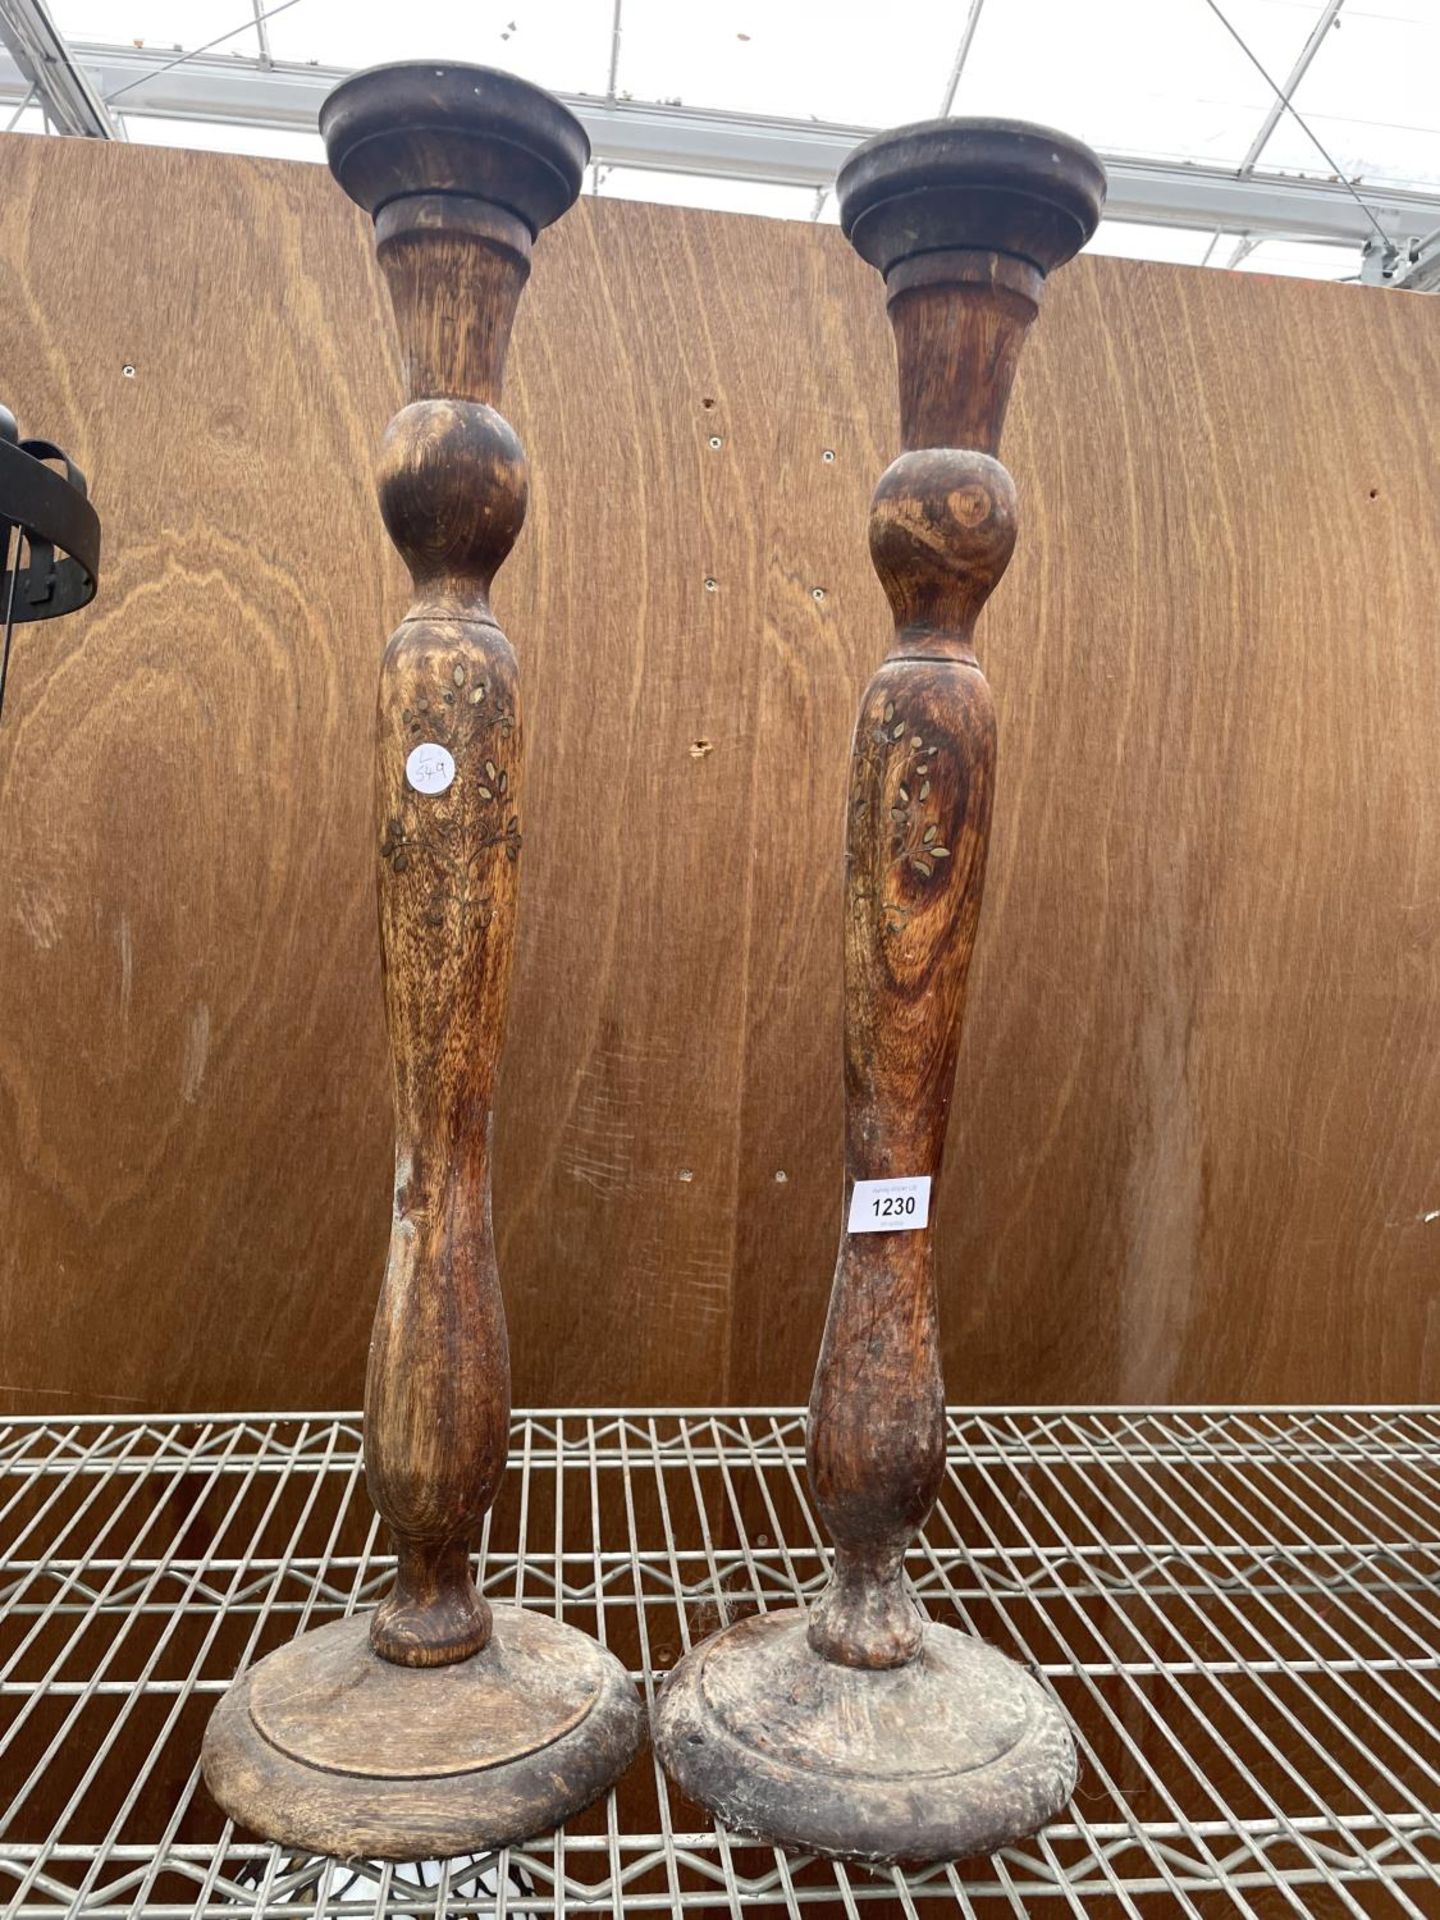 A PAIR OF CARVED WOODEN CANDLESTICKS WITH INSET FLORAL DESIGN